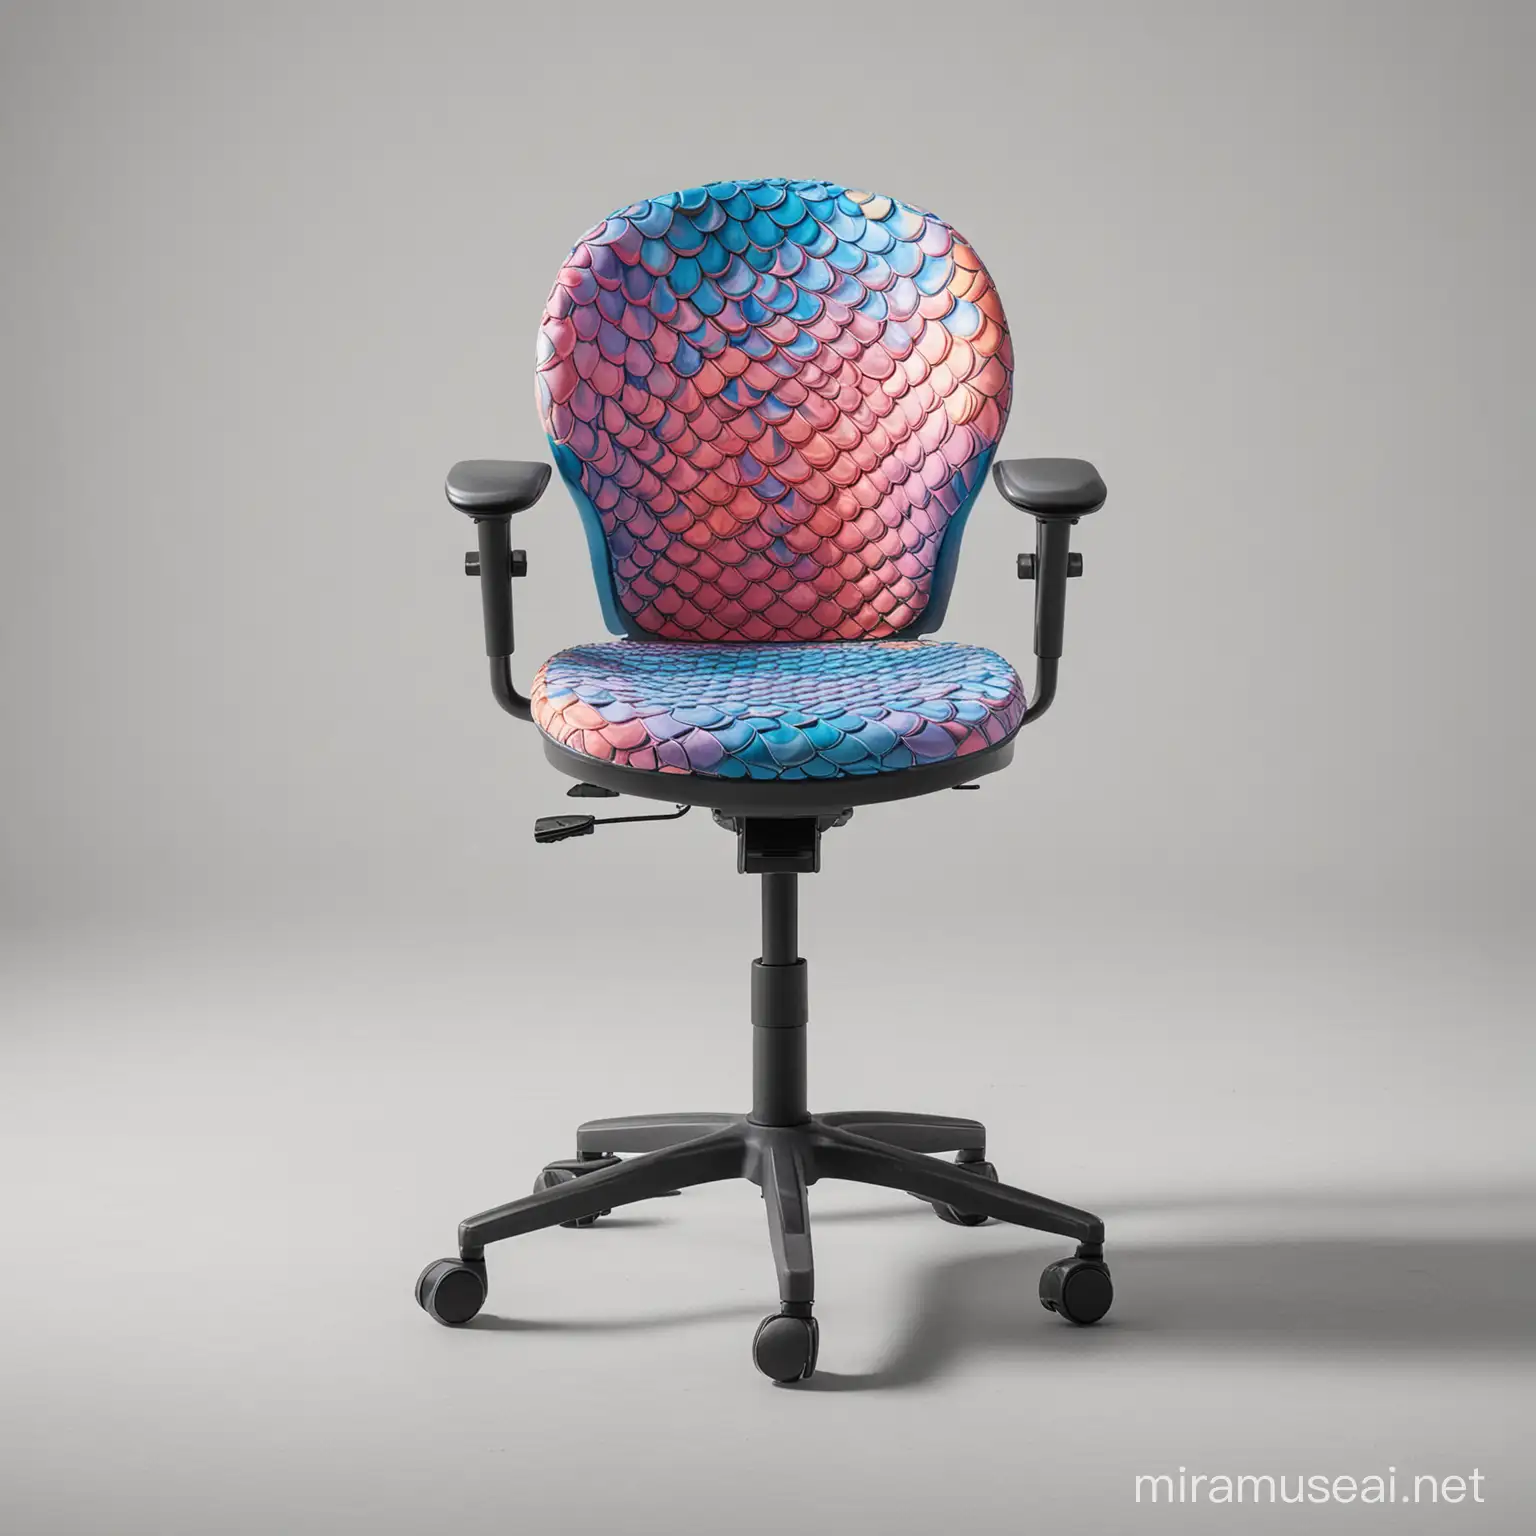 Colorful Fish Scale Office Chair with Adjustable Fins for Playful and Comfortable Posture